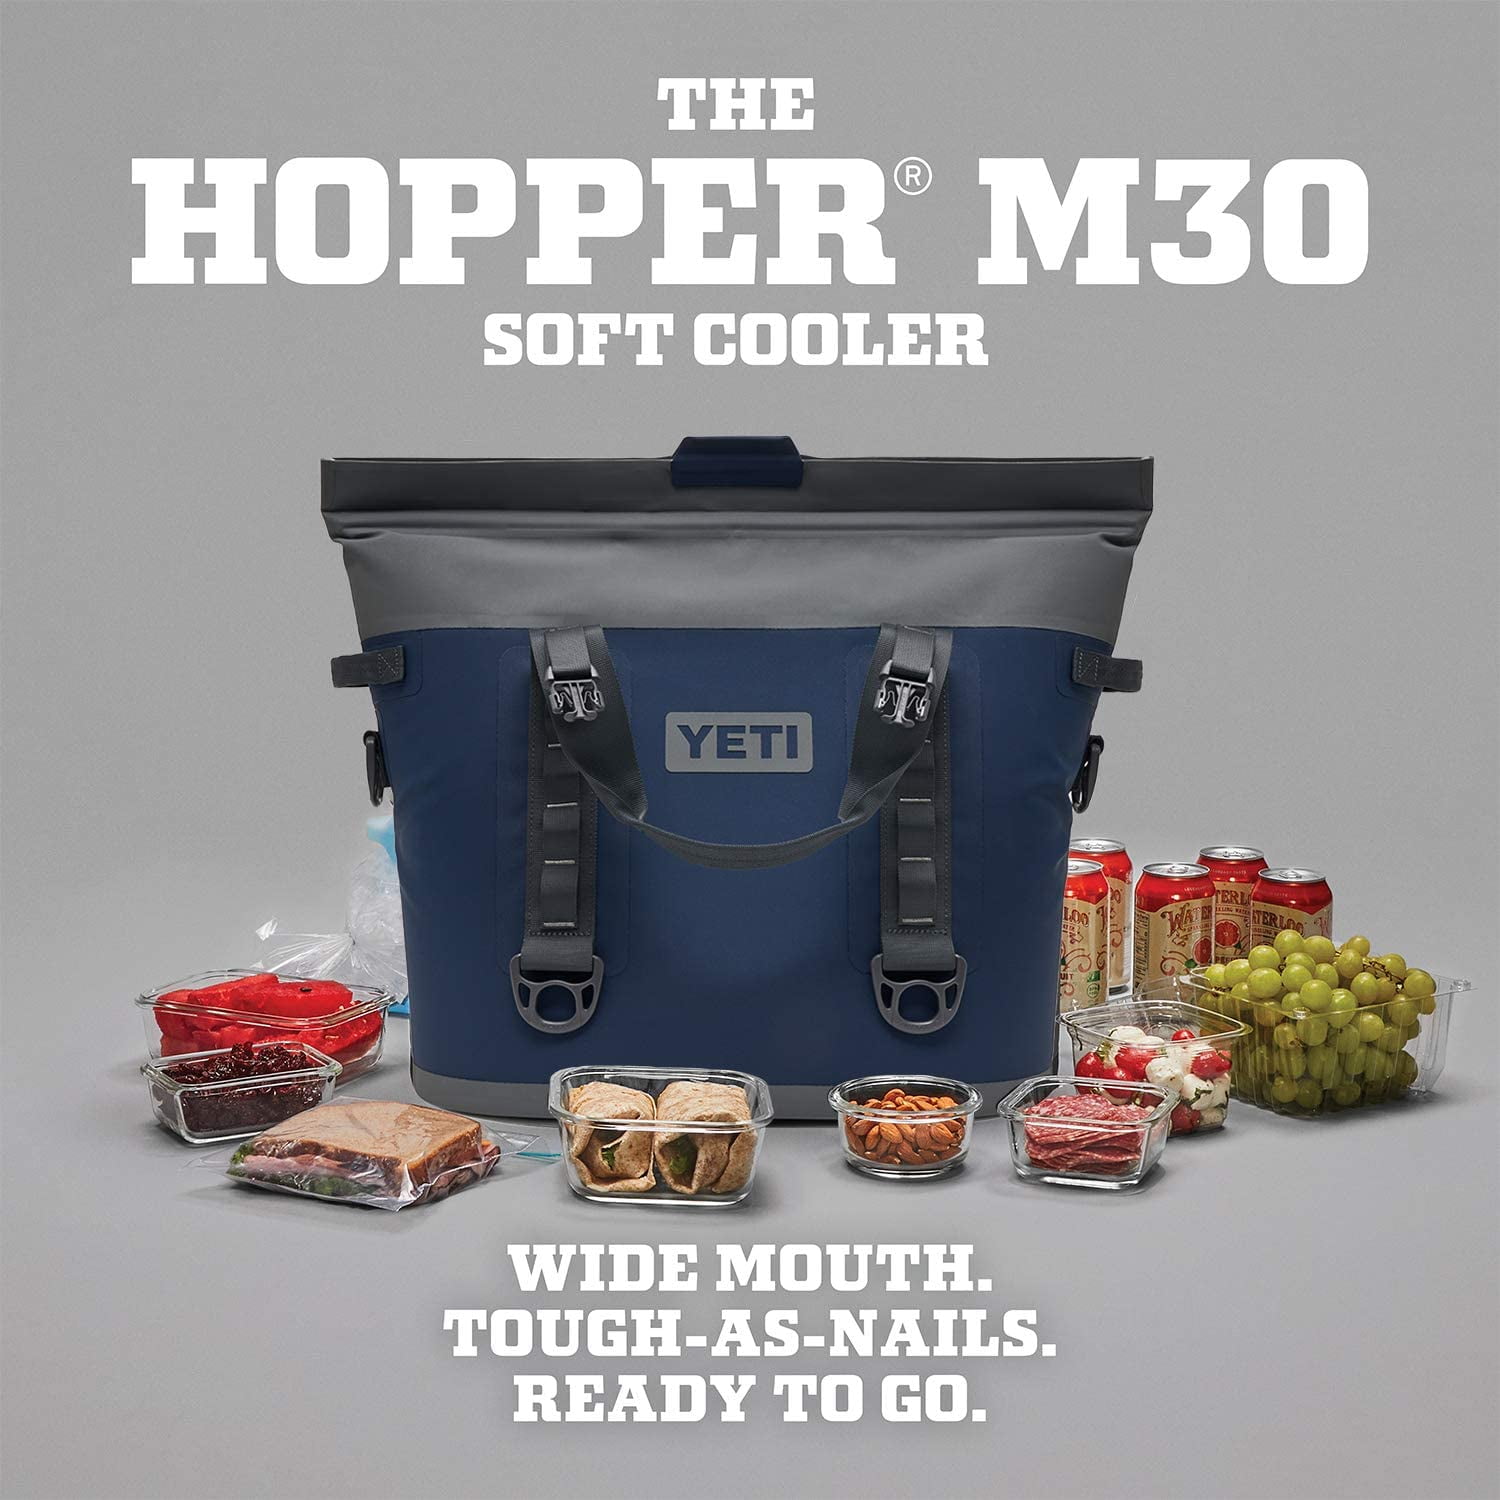 YETI Hopper M30 2.0 Portable Soft Cooler with MagShield Access, Charco–